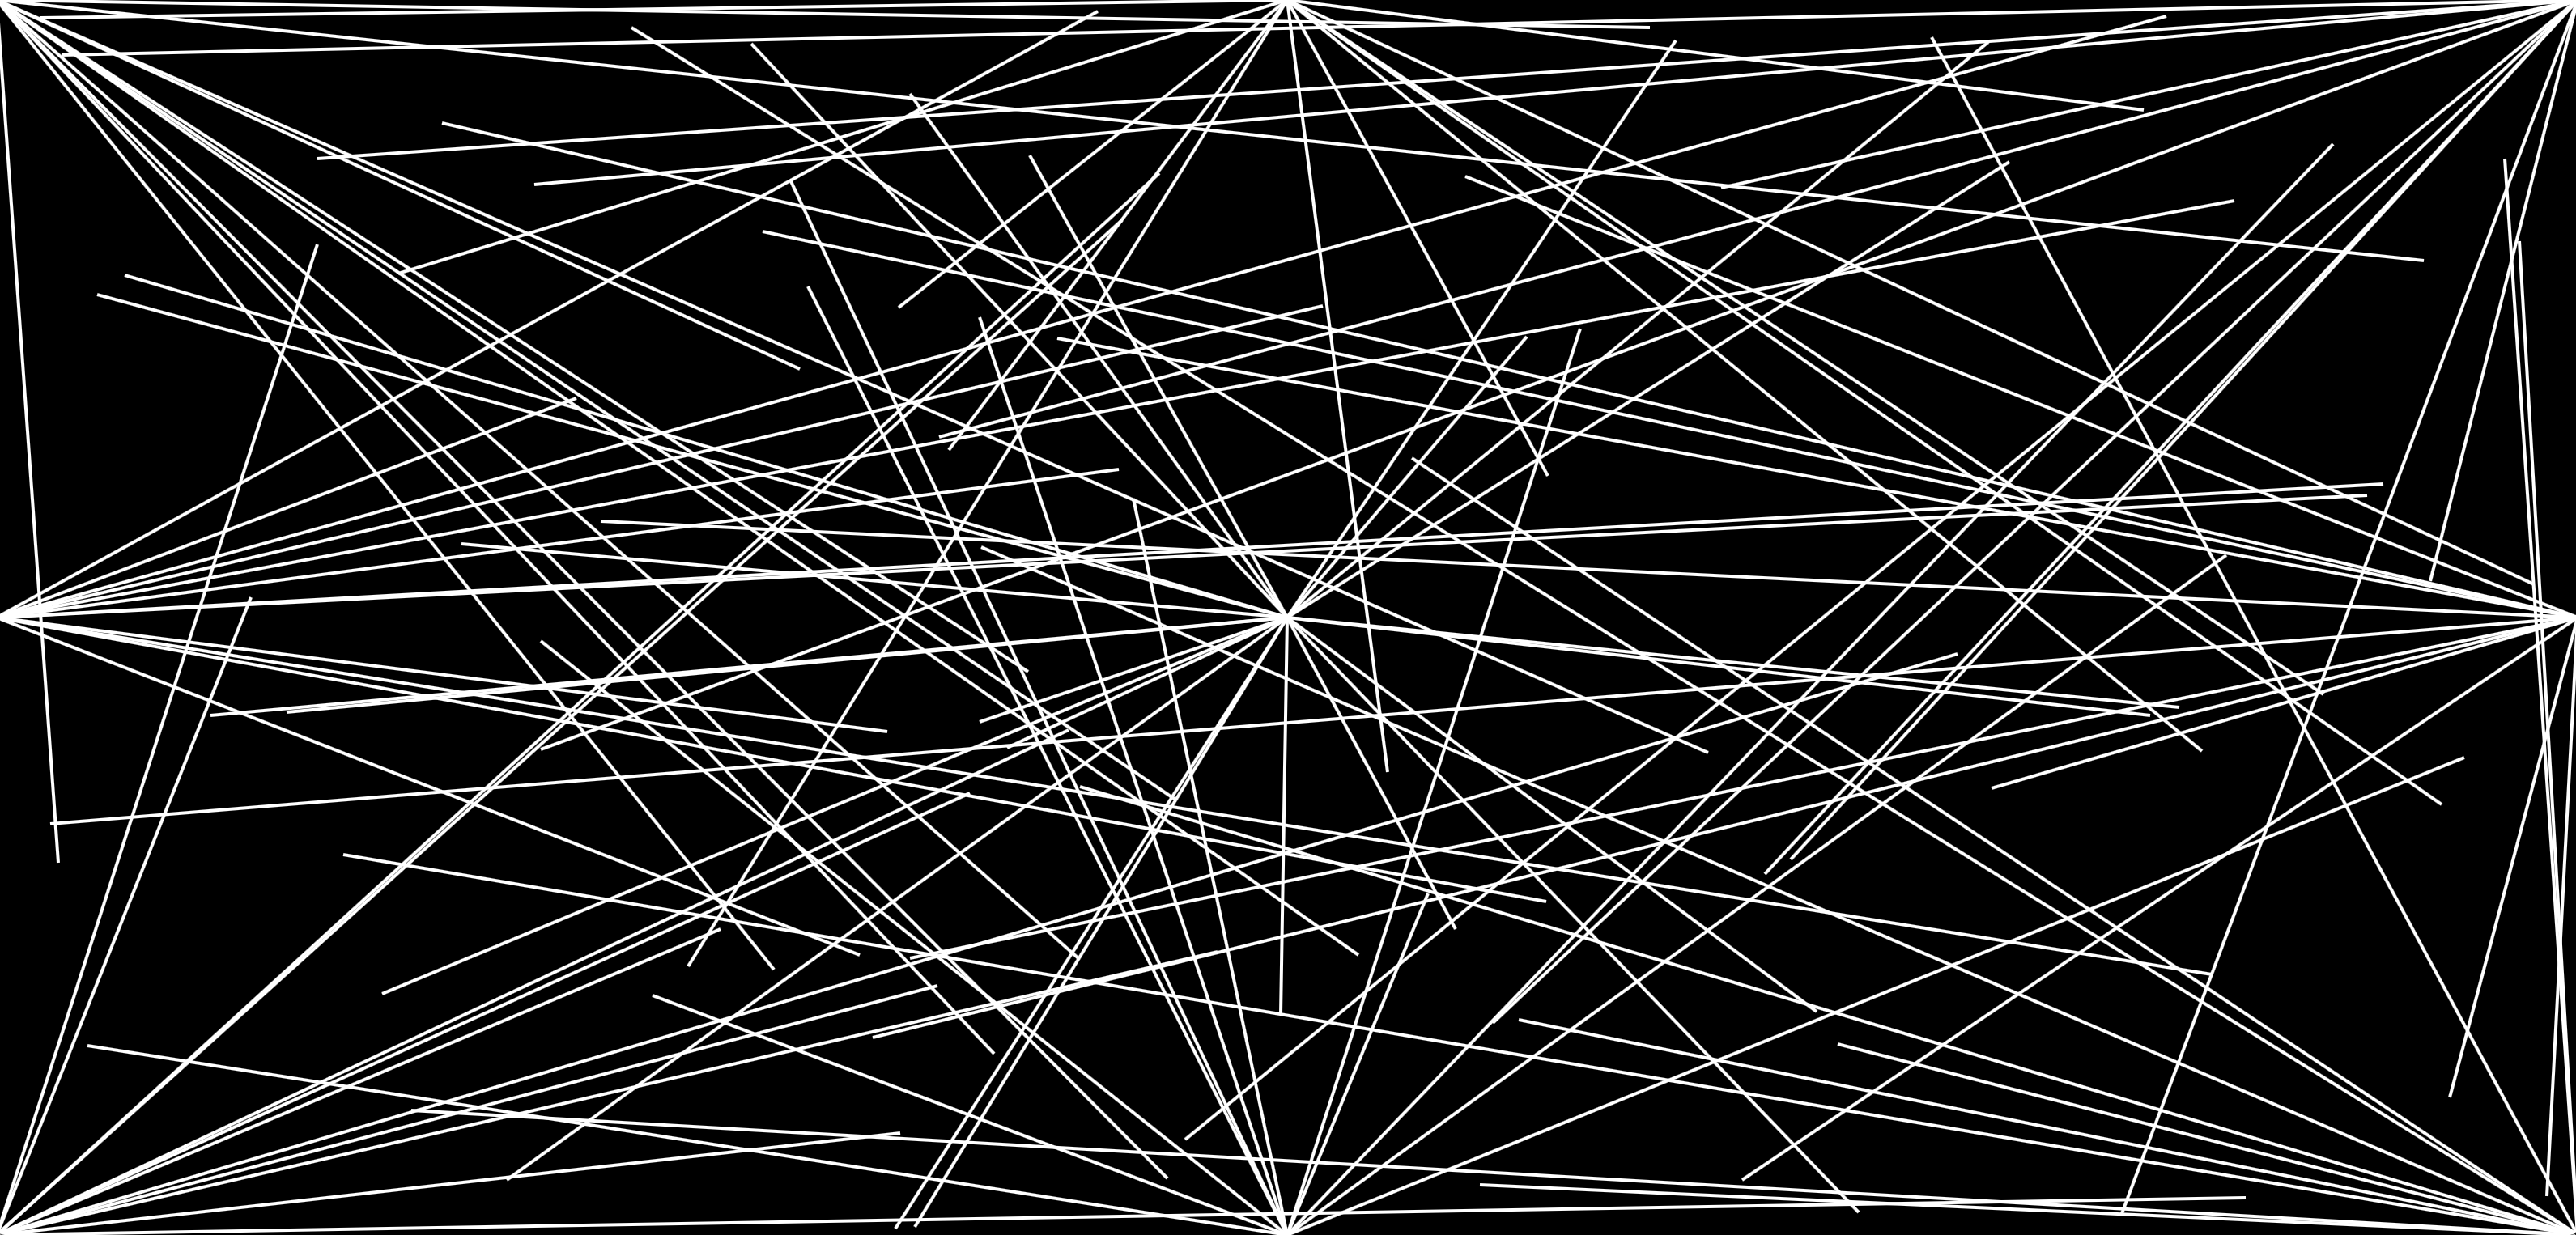 Sol LeWitt’s Wall Drawing 289 with D3.js Transitions